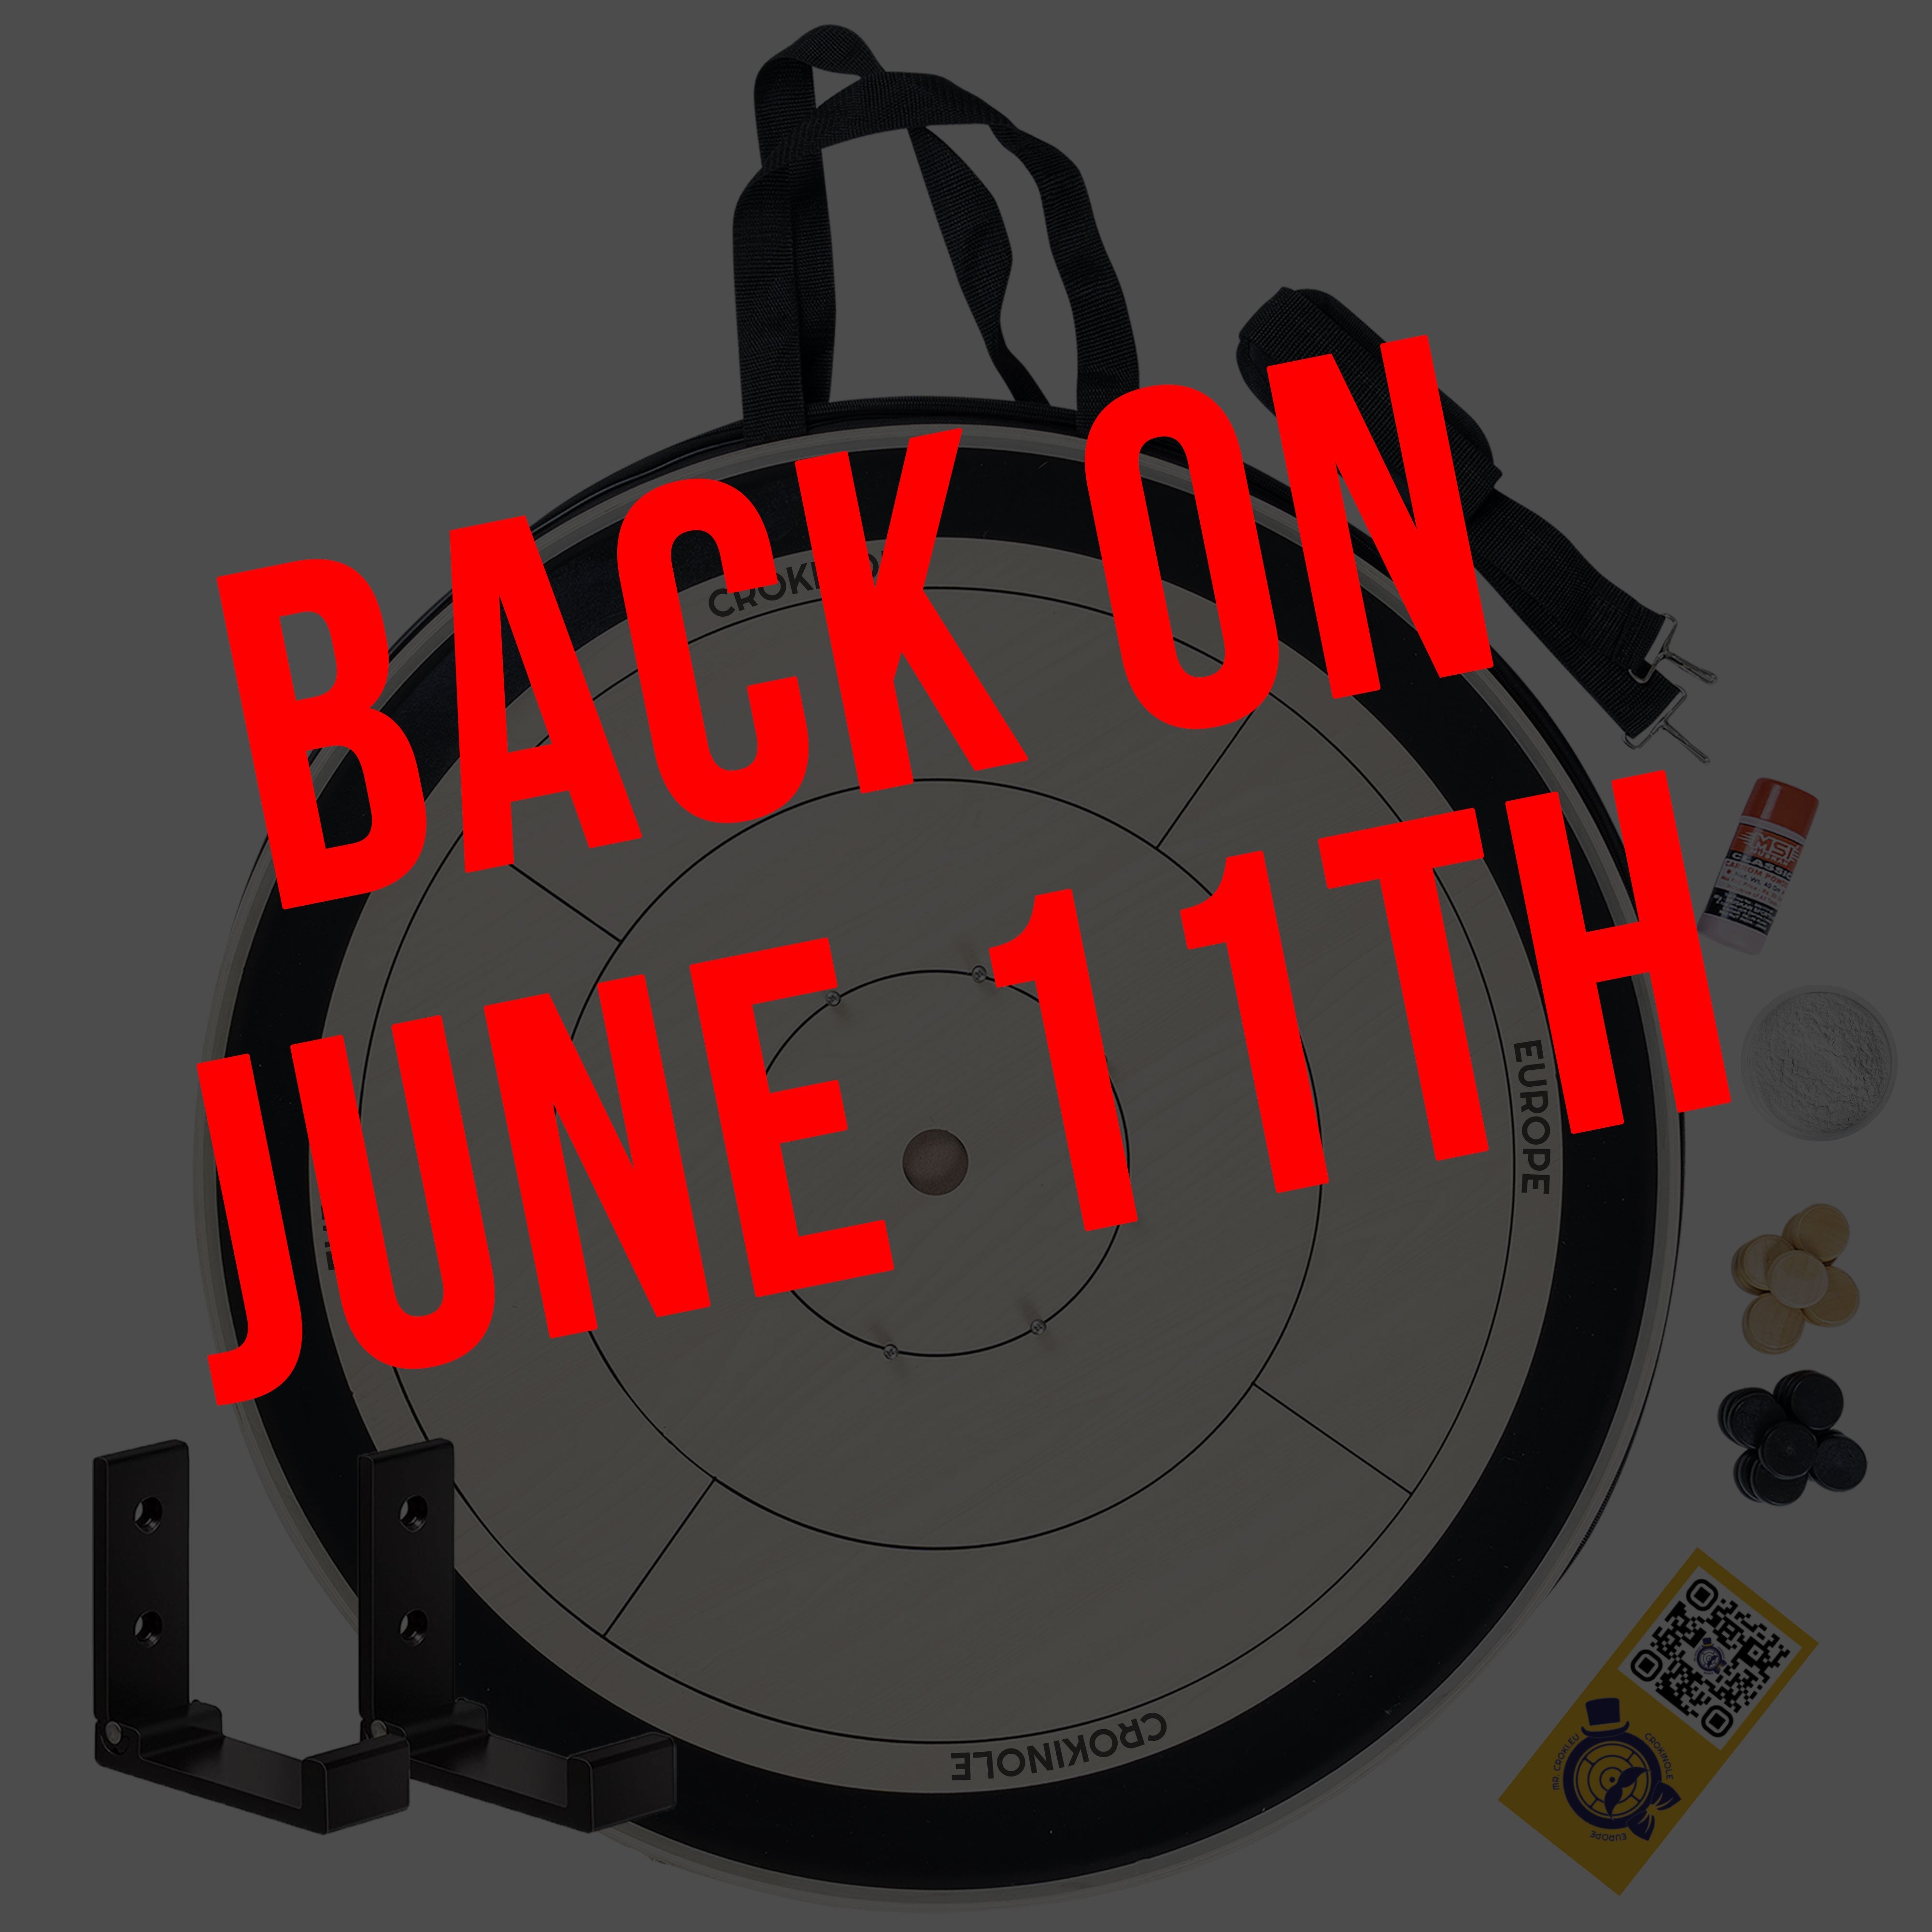 PRE SALE > 11 JUNE > Crokinole Board Game - Brown Tournament Board, 26 Discs, Carrom Powder, Carrying Bag - Official Dimensions - Strategic Game for Young and Old - Buy Crokinole